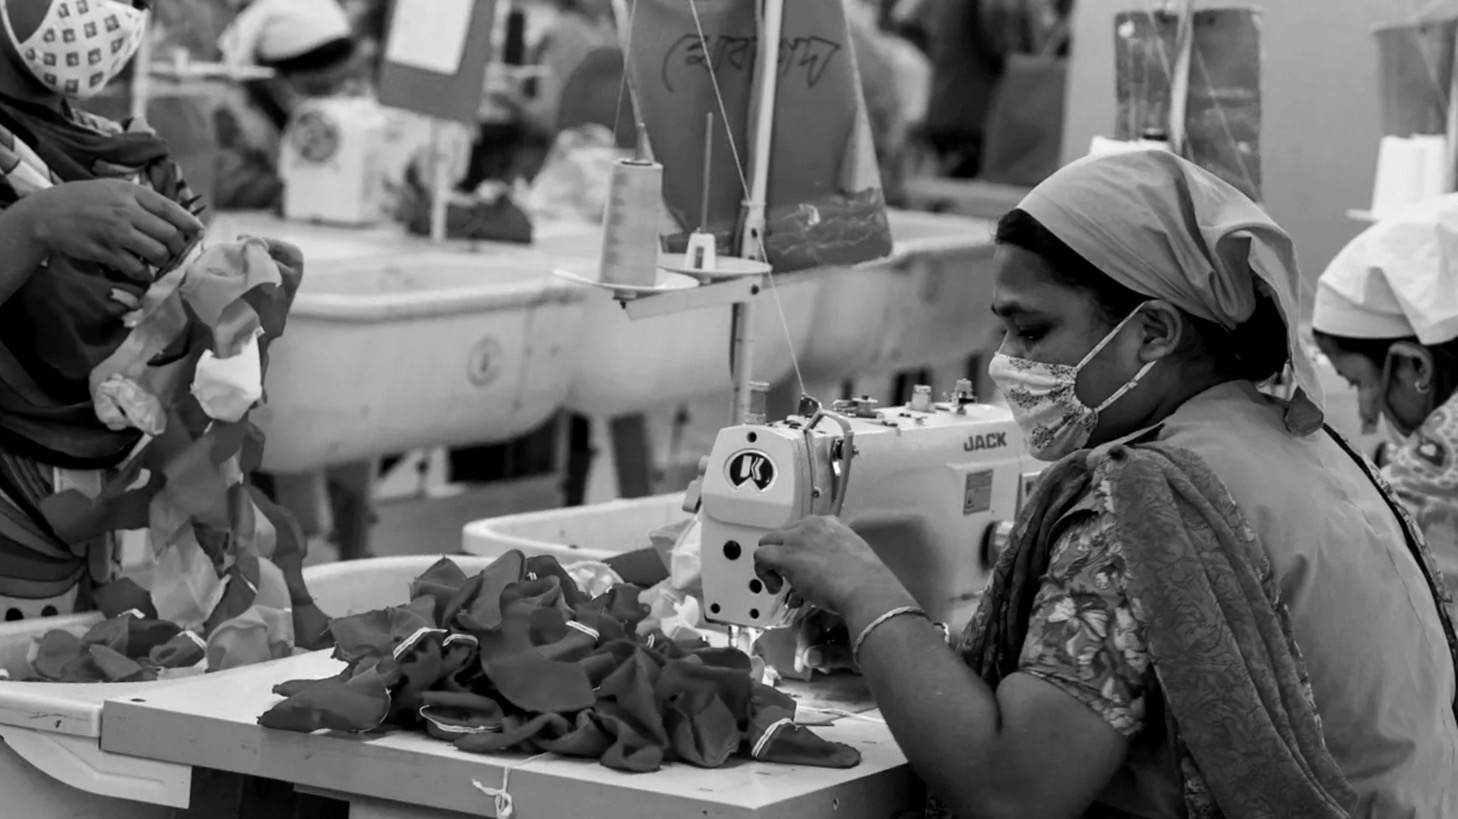 Garment workers wage theft report